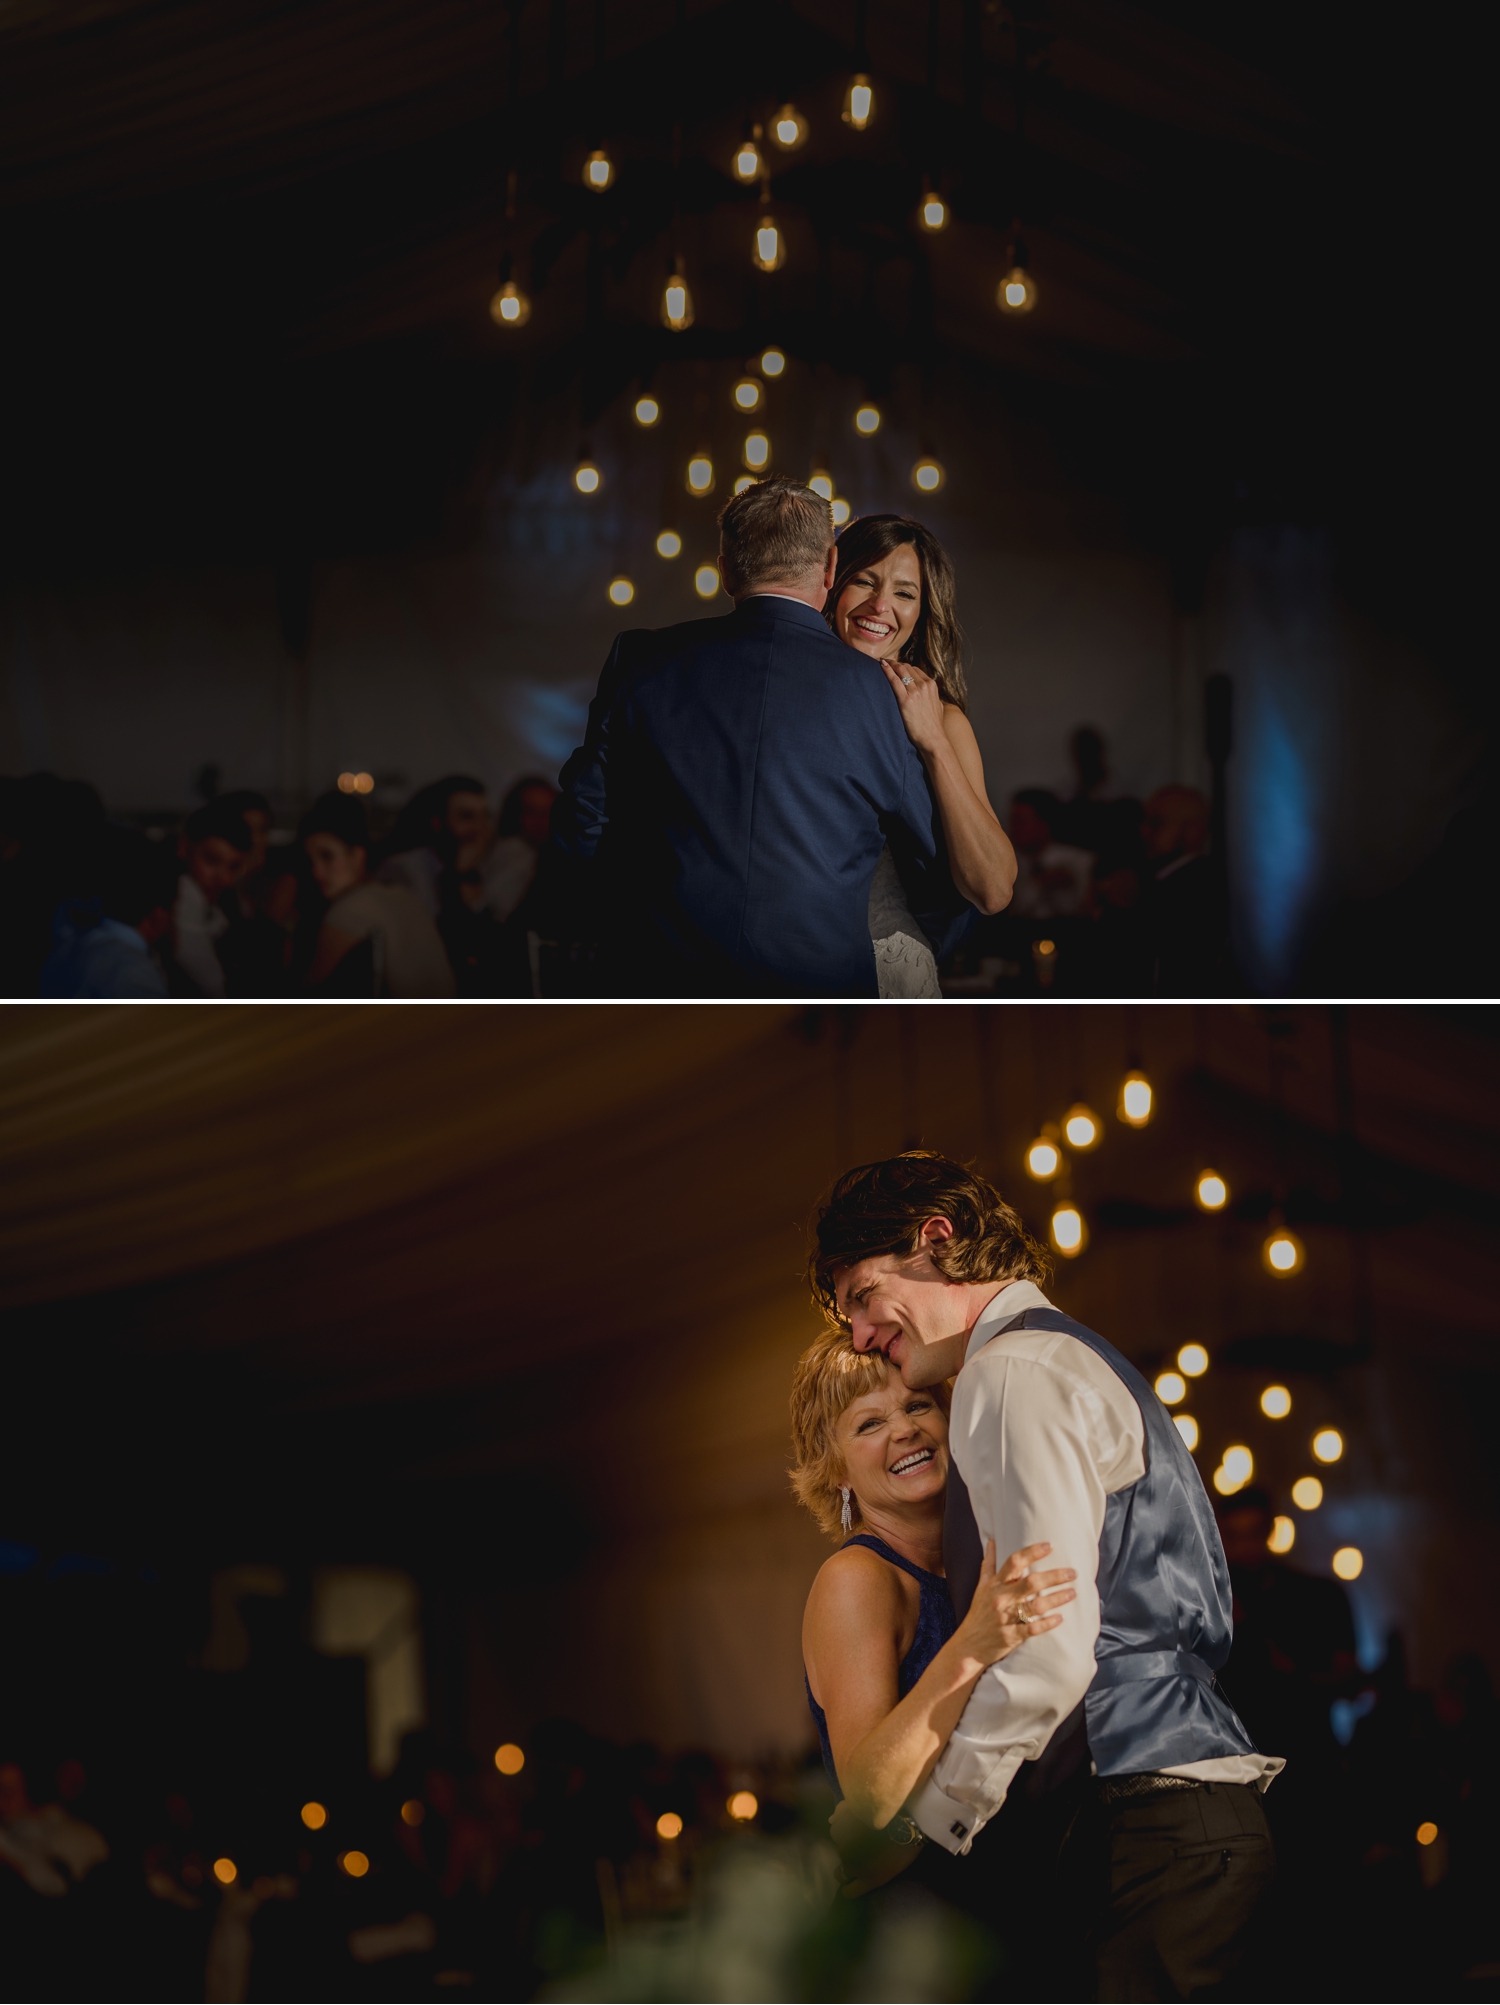 photo of bride and groom having their parent dances during a wedding reception at the ravine vineyard in niagara on the lake ontario